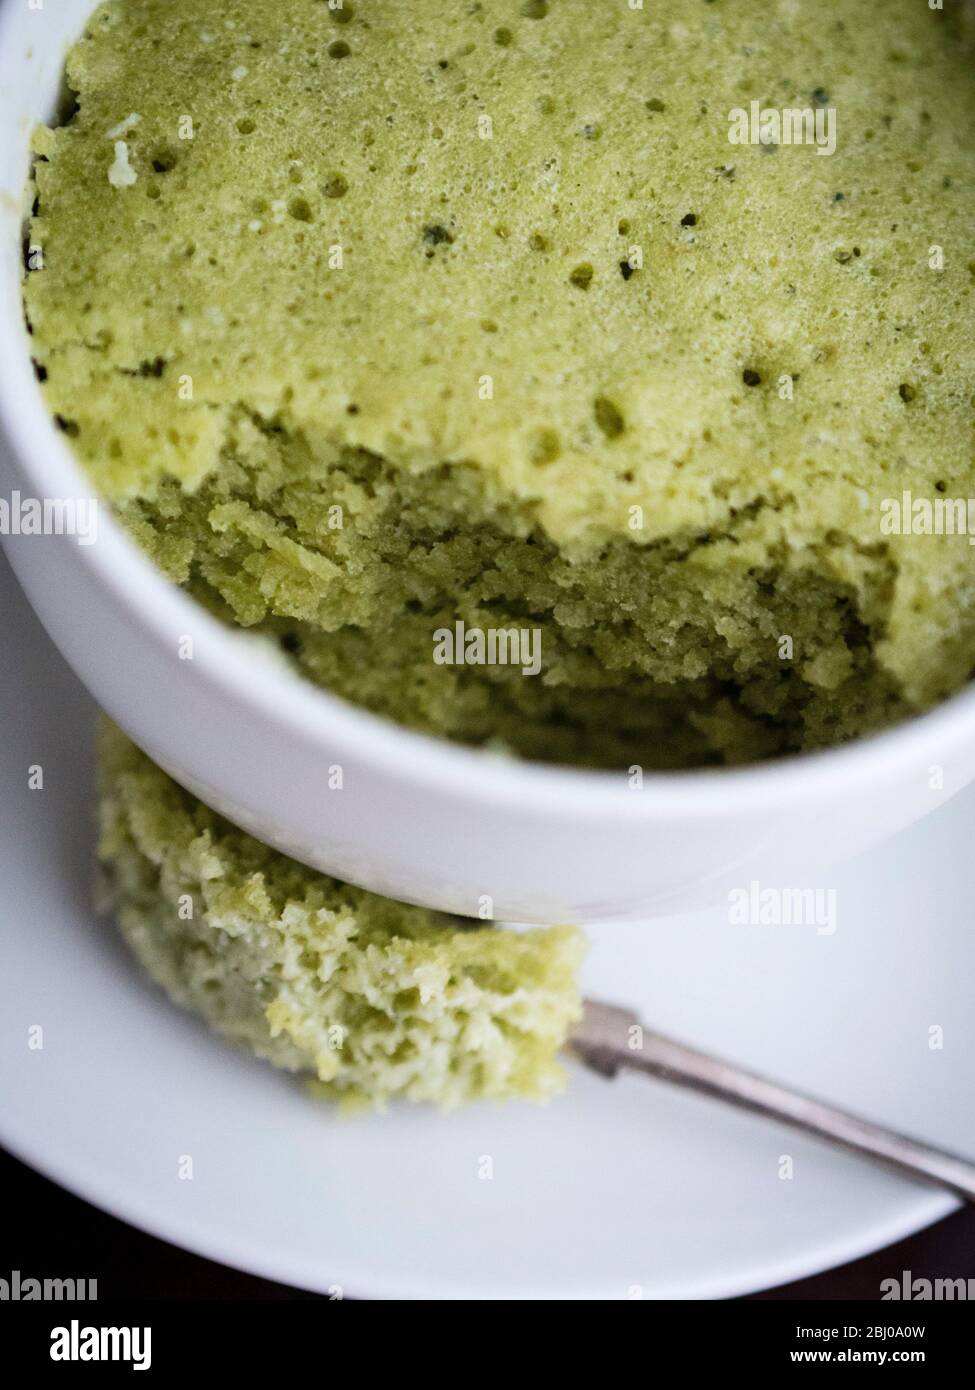 Delicious simple cake made with ground almonds and matcha green tea powder, baked in a cup in a microwave oven. Stock Photo